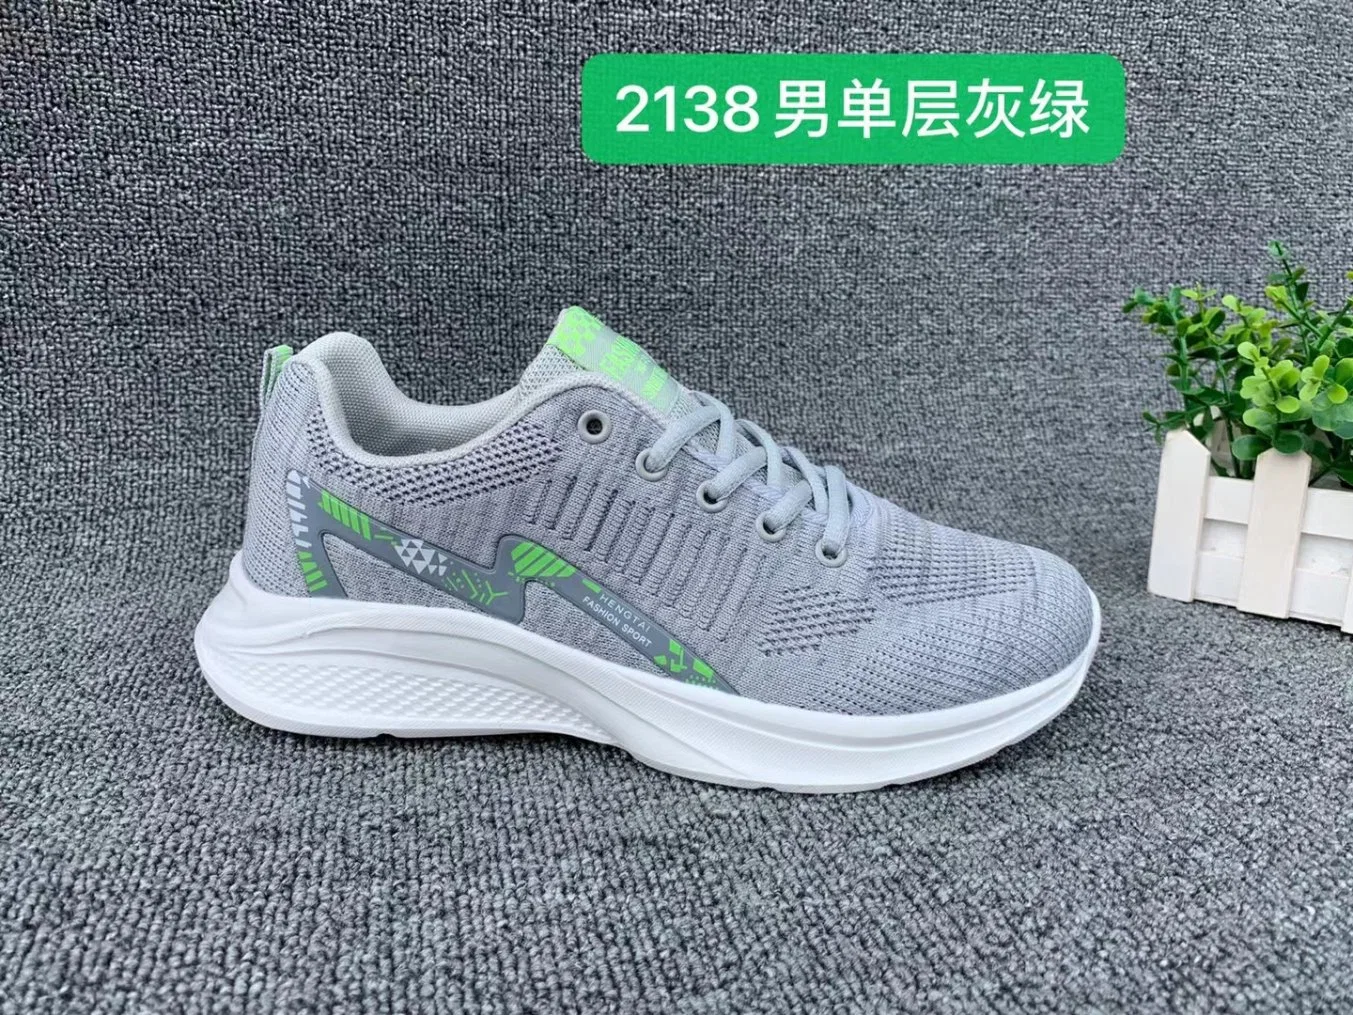 Fashion Women Sneakers Running Shoes Men Sports Shoes Breathable Mesh Comfort Jogging Mesh Shoes Lace up Leisure Shoes